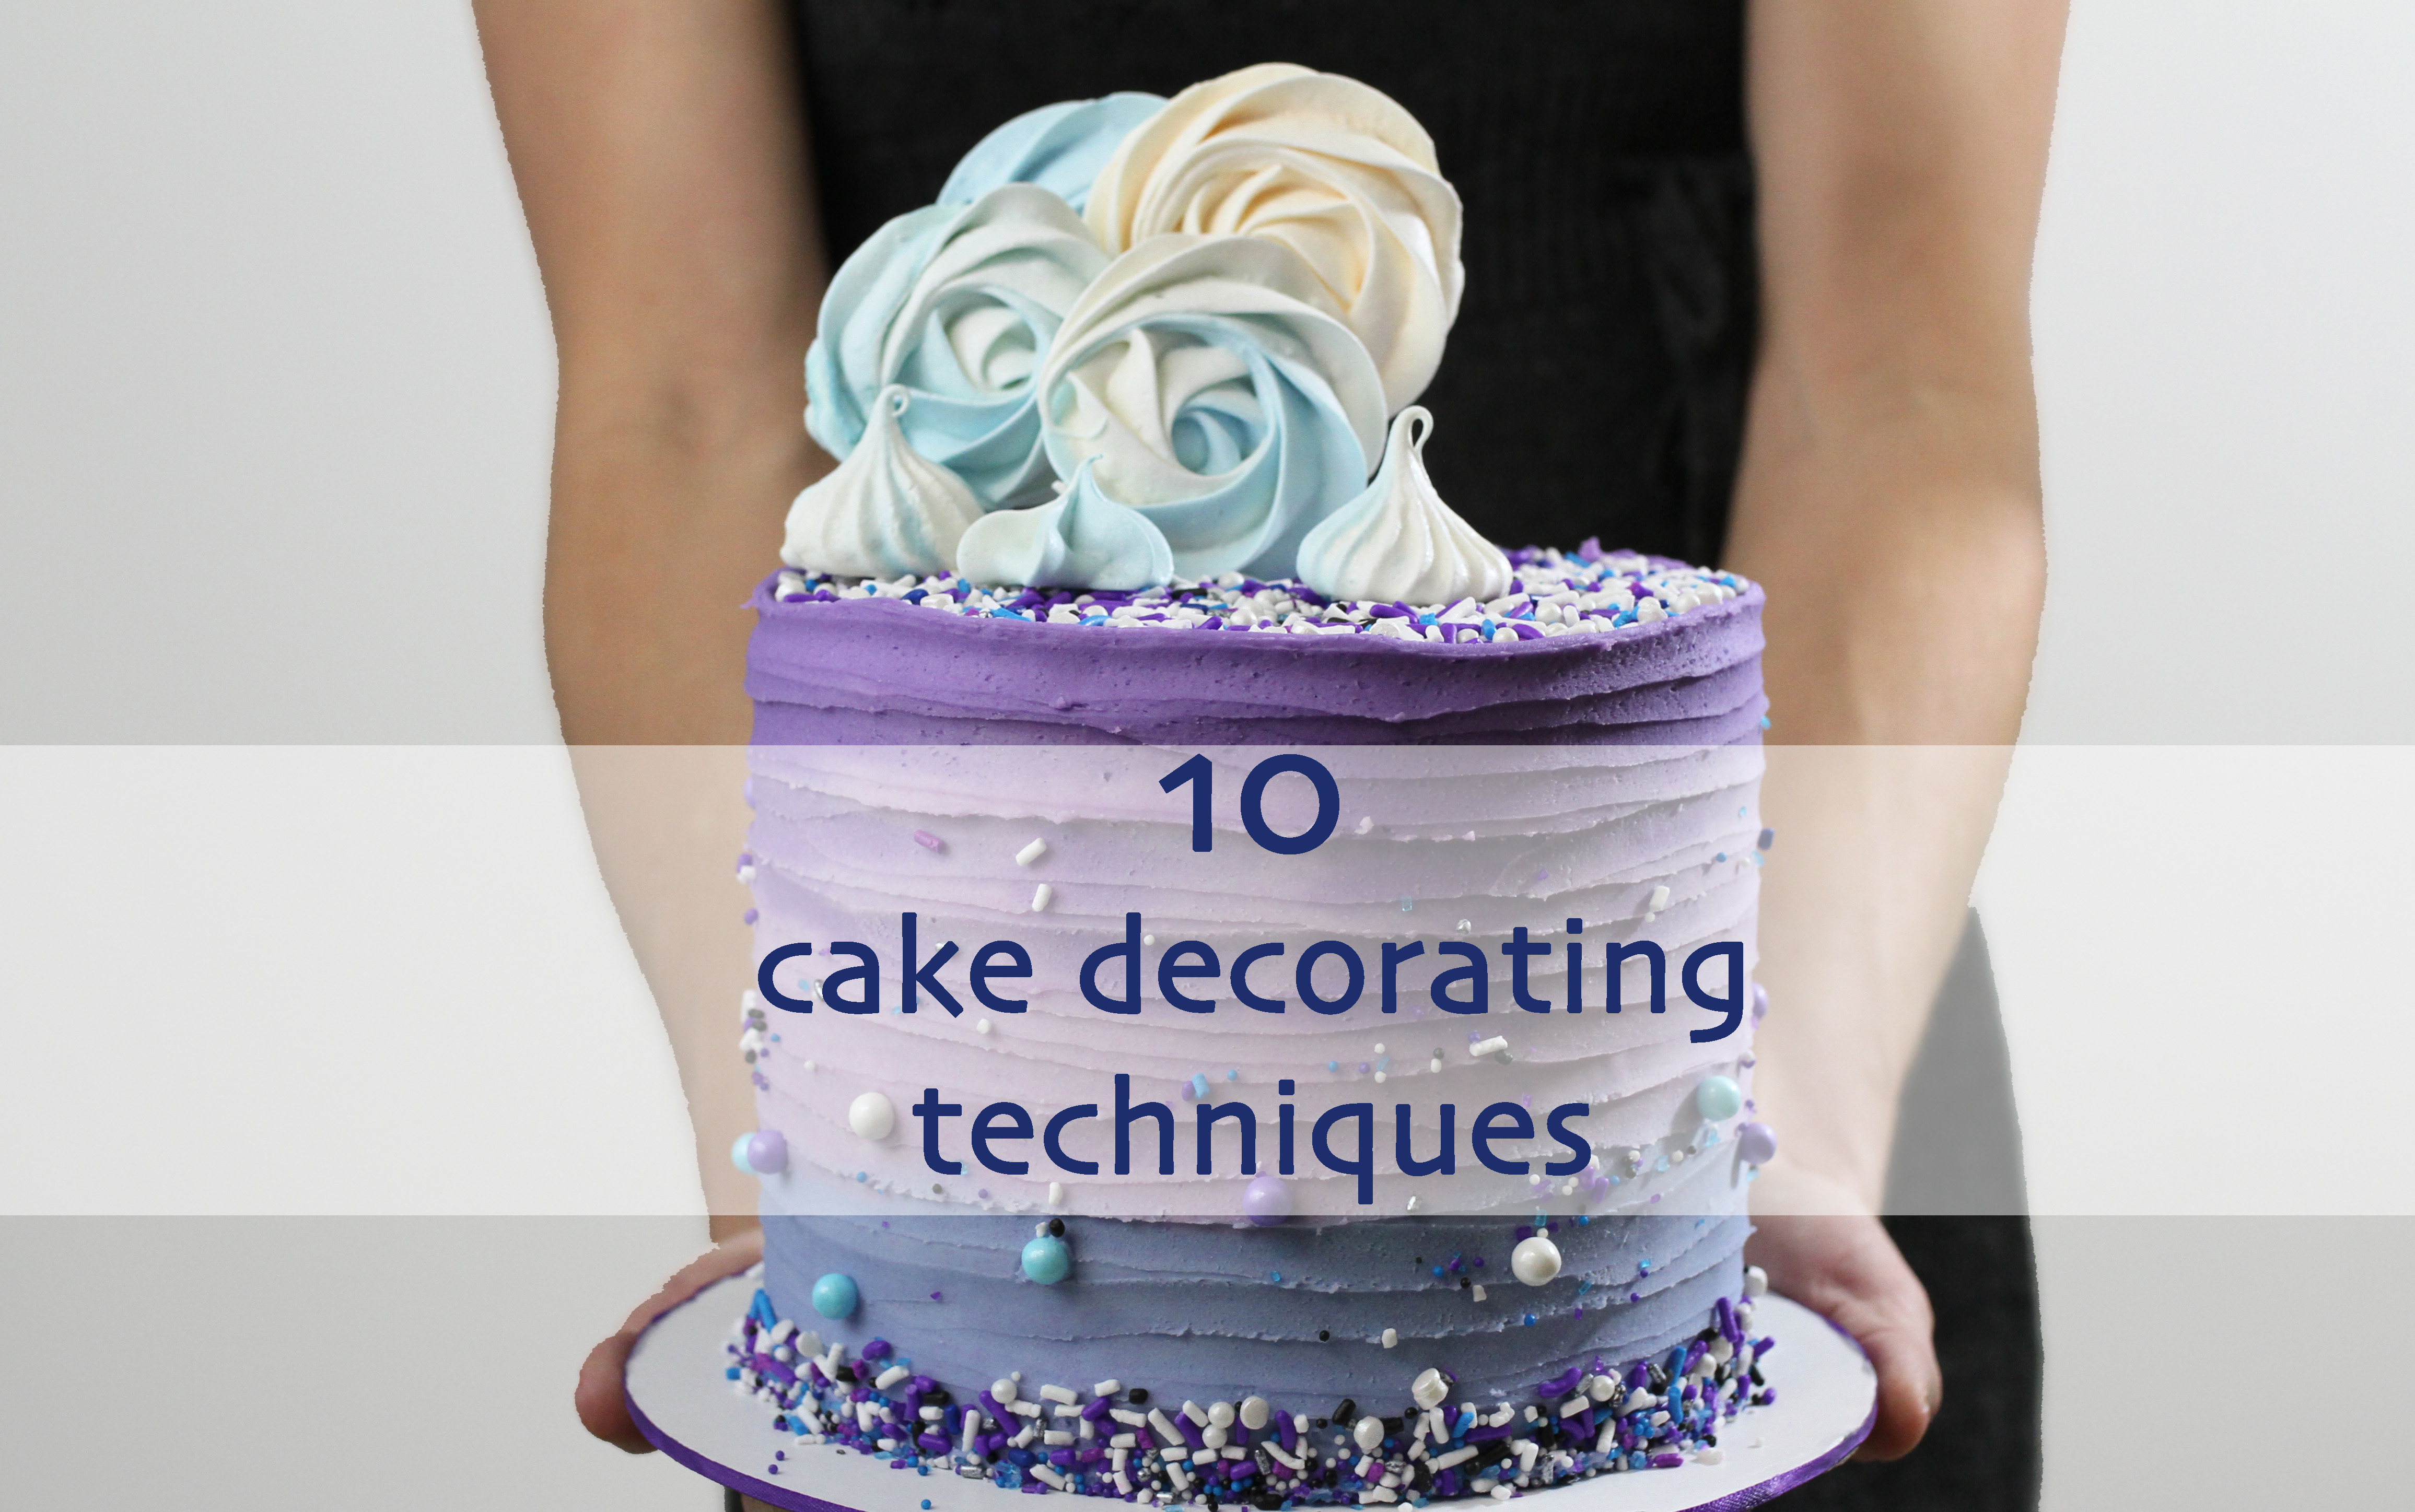 10 Cake Decorating Techniques Course | British Girl Bakes